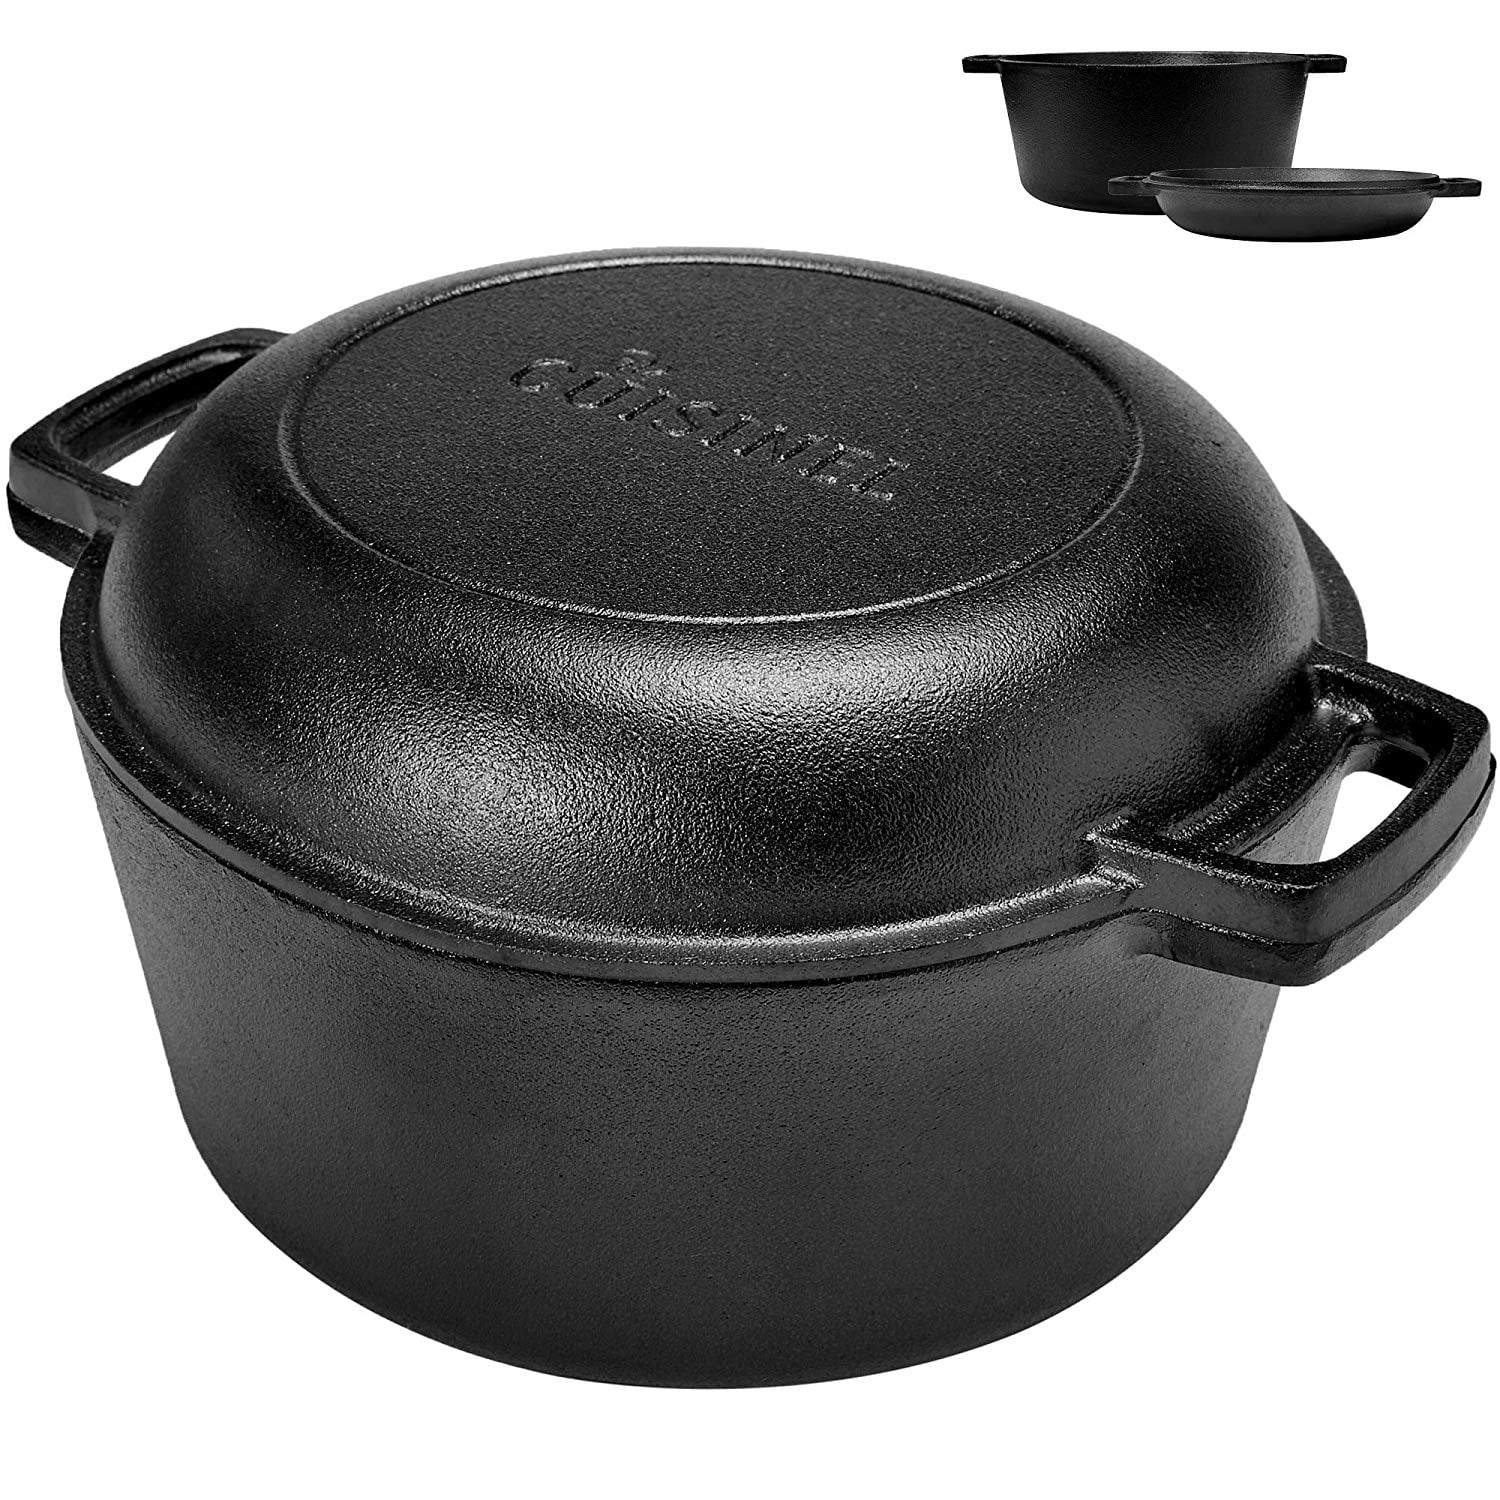 Pre-Seasoned Cast Iron Skillet and Double Dutch Oven Set – 2 In 1